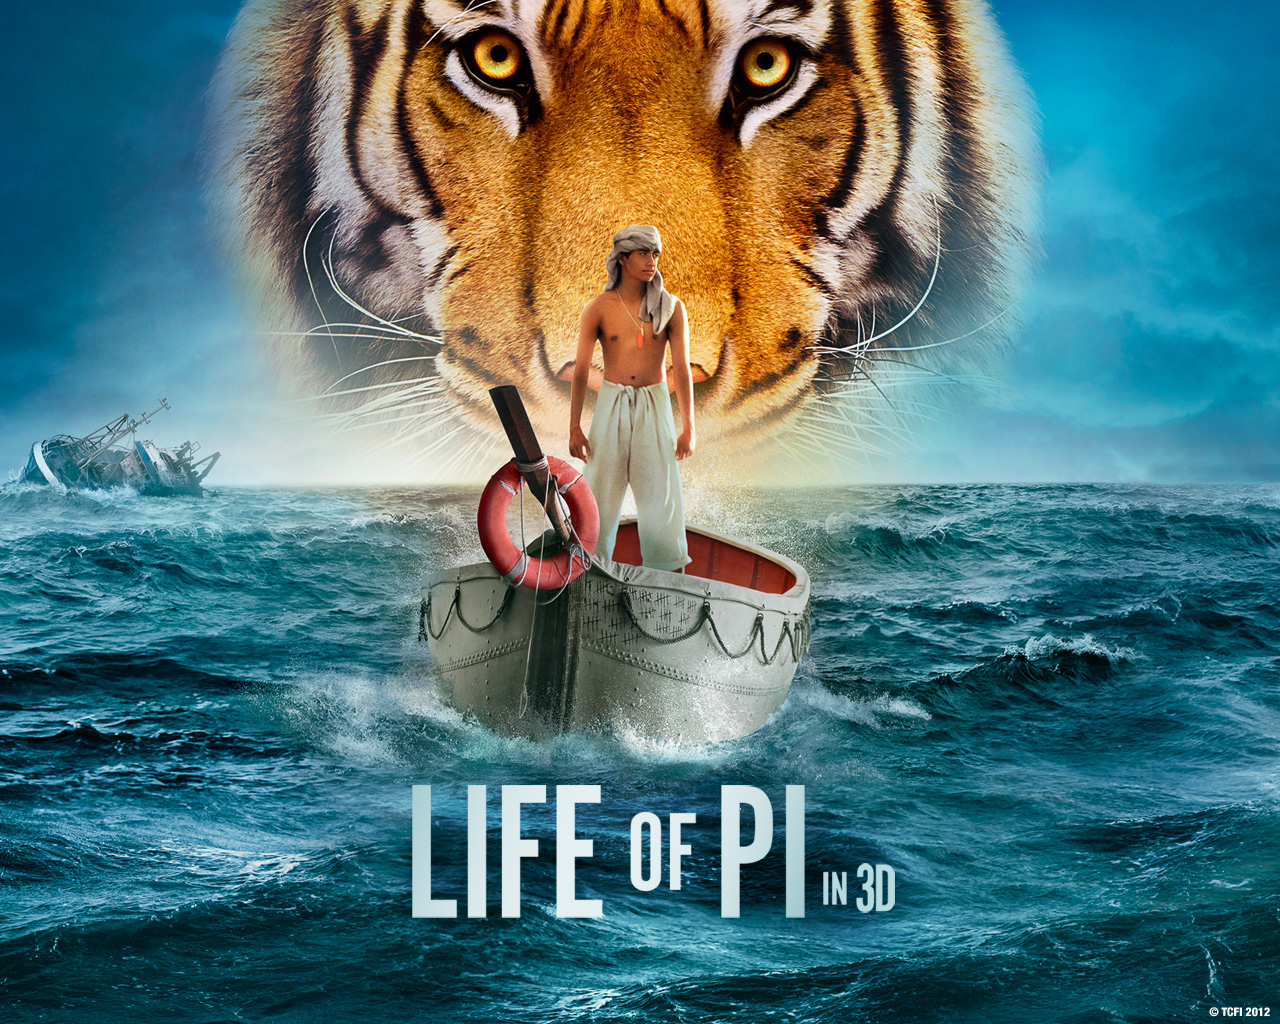 Life of Pi: Life of Pi movie overview